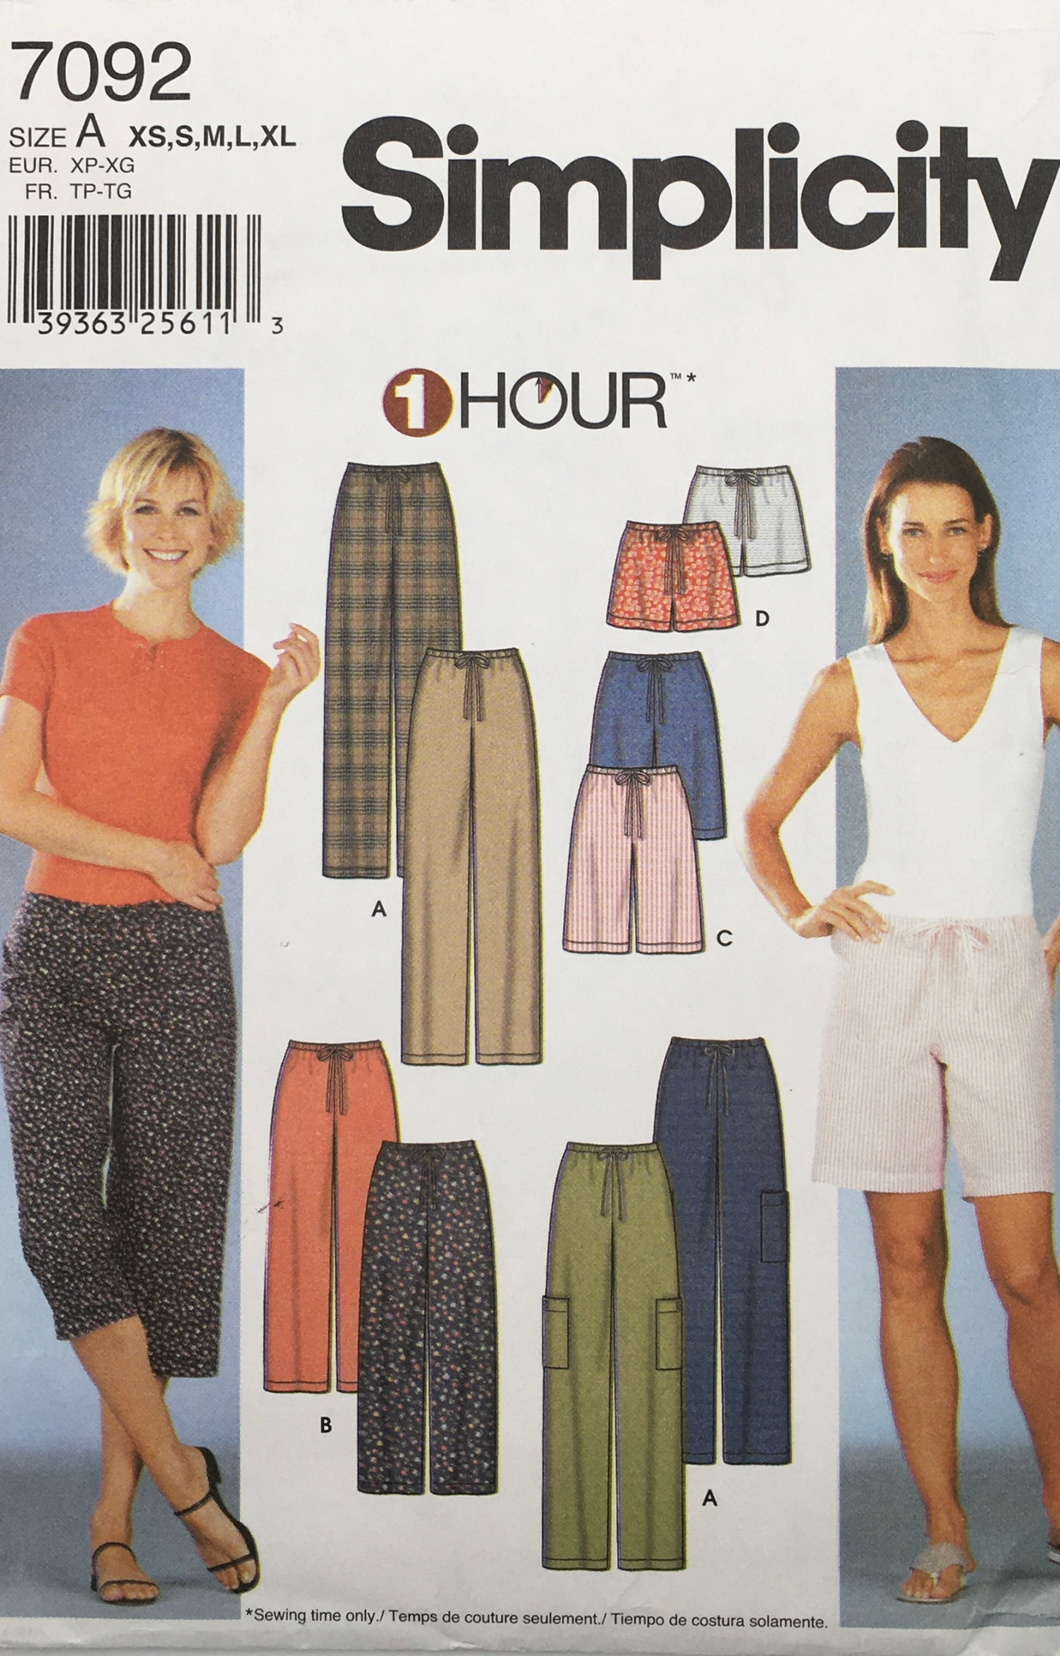 2002 Sewing Pattern: Simplicity 7092